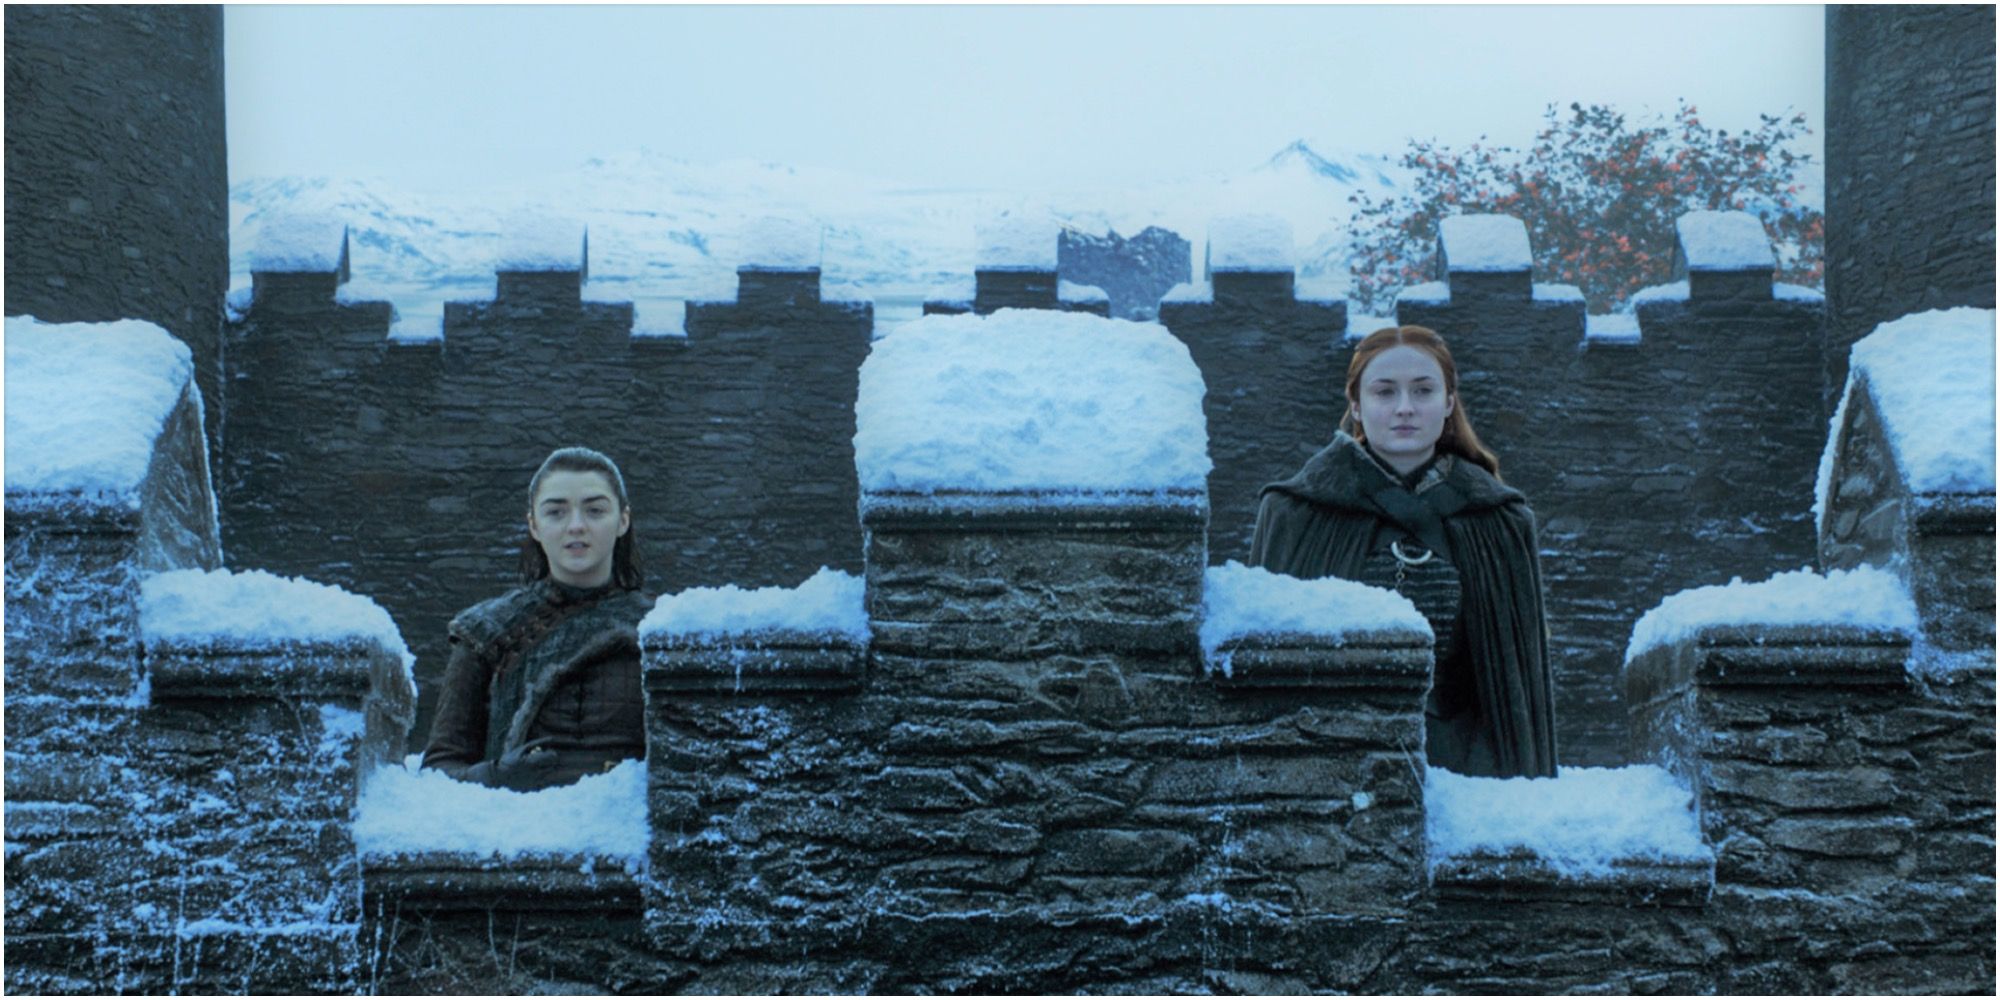 Game of Thrones Locations To Visit Westeros Winterfell Arya and Sansa Looking Ovre Castle